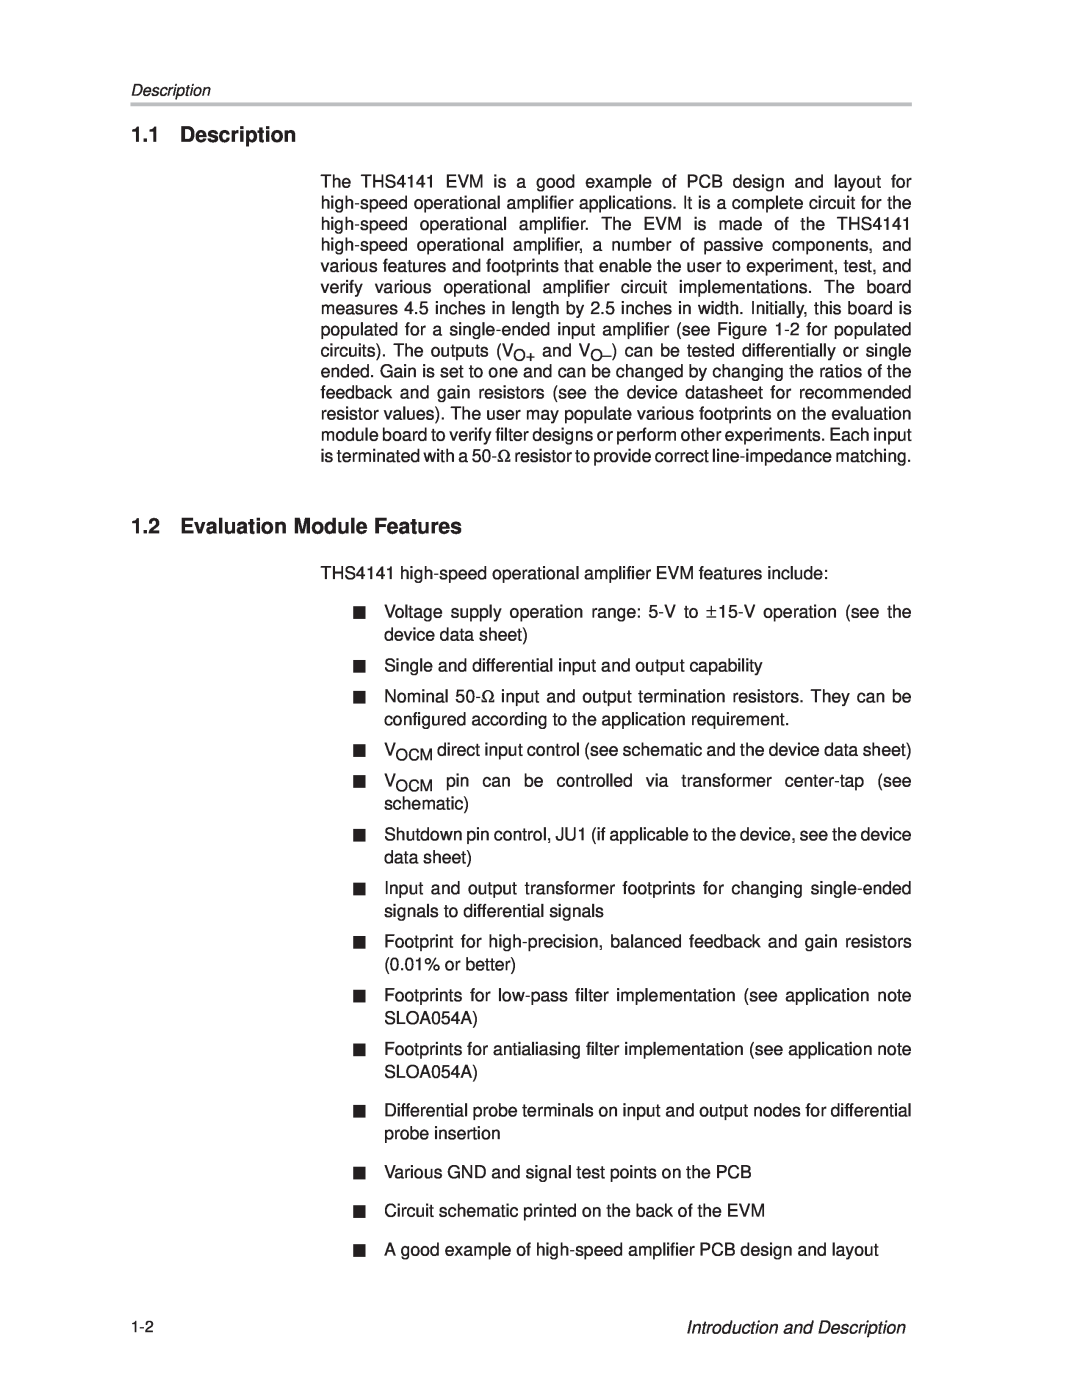 Texas Instruments THS4141 manual Evaluation Module Features, Introduction and Description 